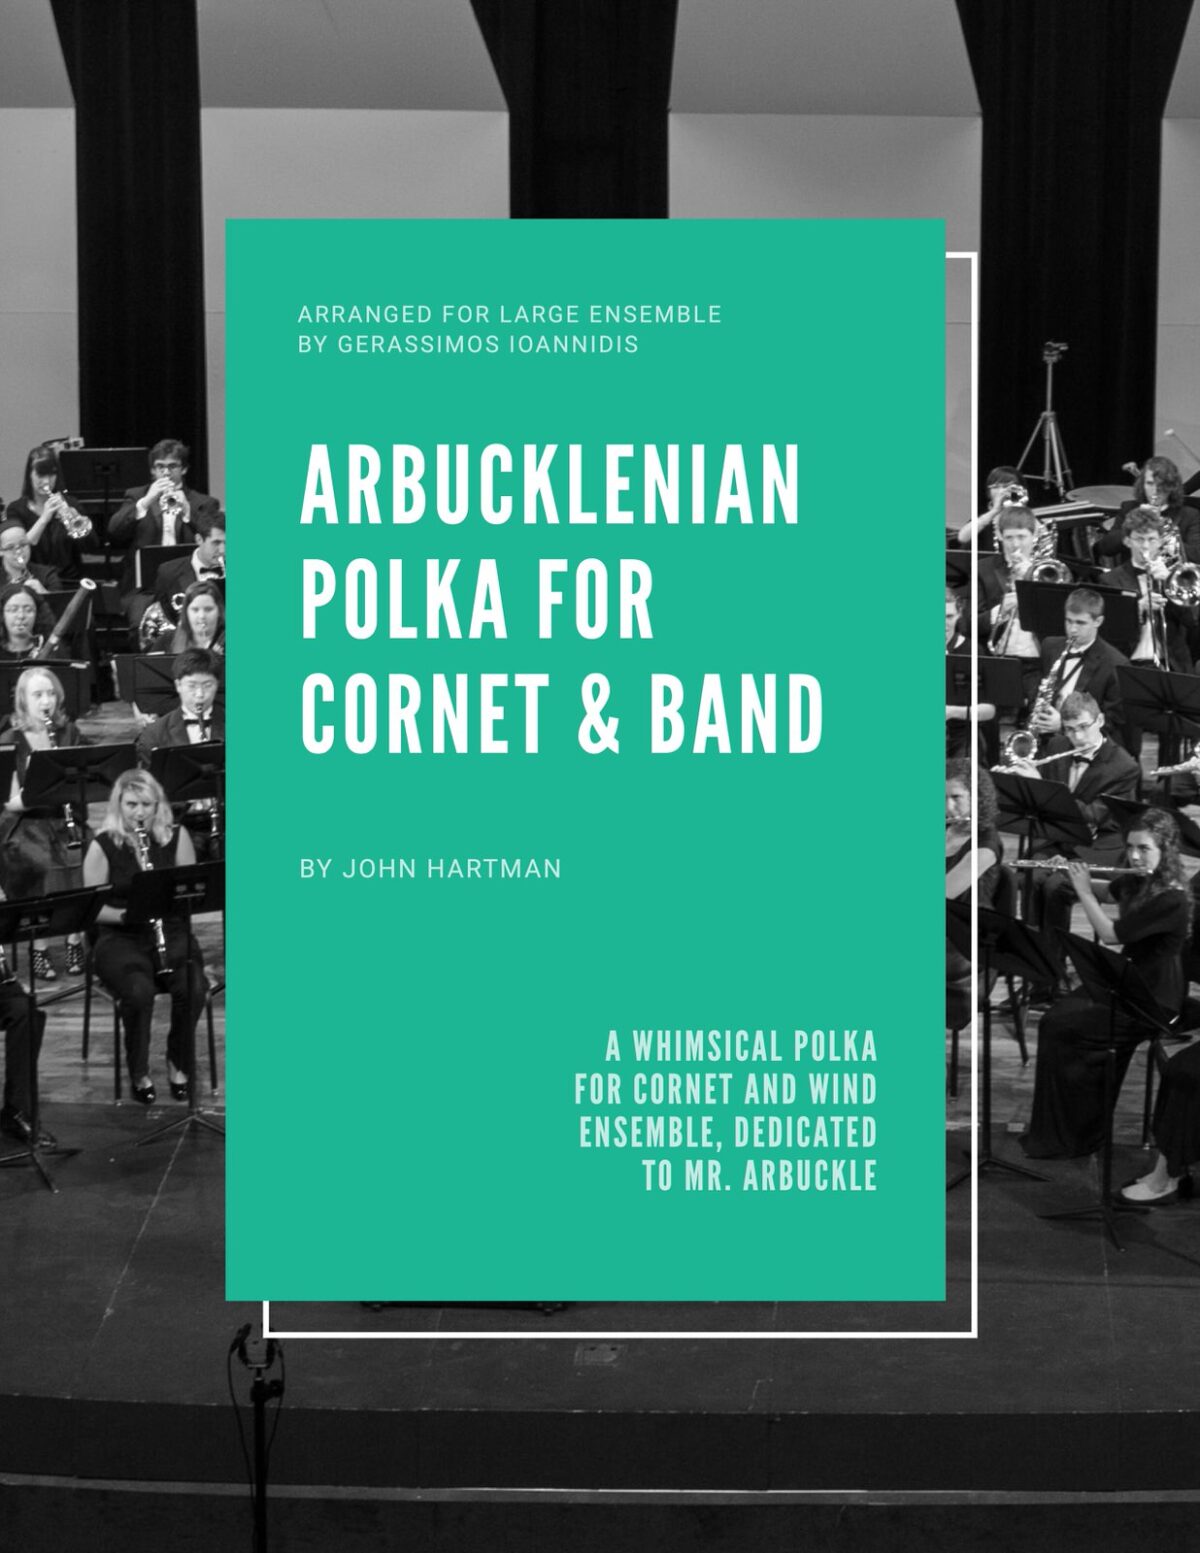 Arbucklenian Polka for Cornet and Band